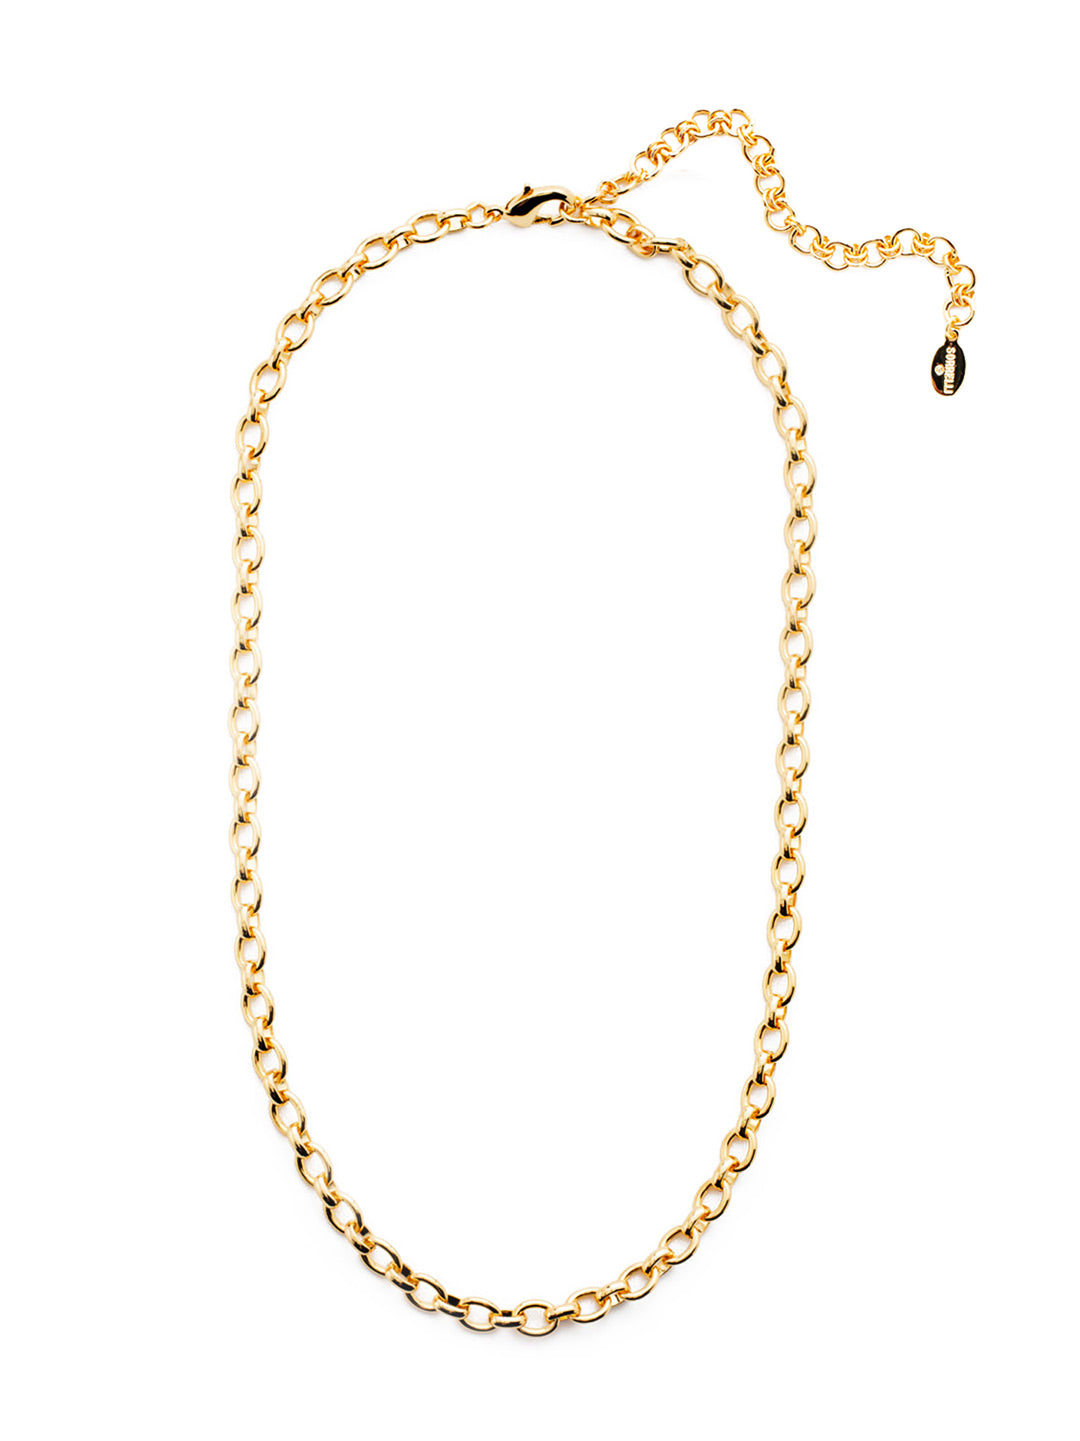 Maci Tennis Necklace - 4NEU94BGCRY - <p>The Maci Tennis Necklace is a little chunky but a simple stunner you can wear for years and years to come. From Sorrelli's Crystal collection in our Bright Gold-tone finish.</p>